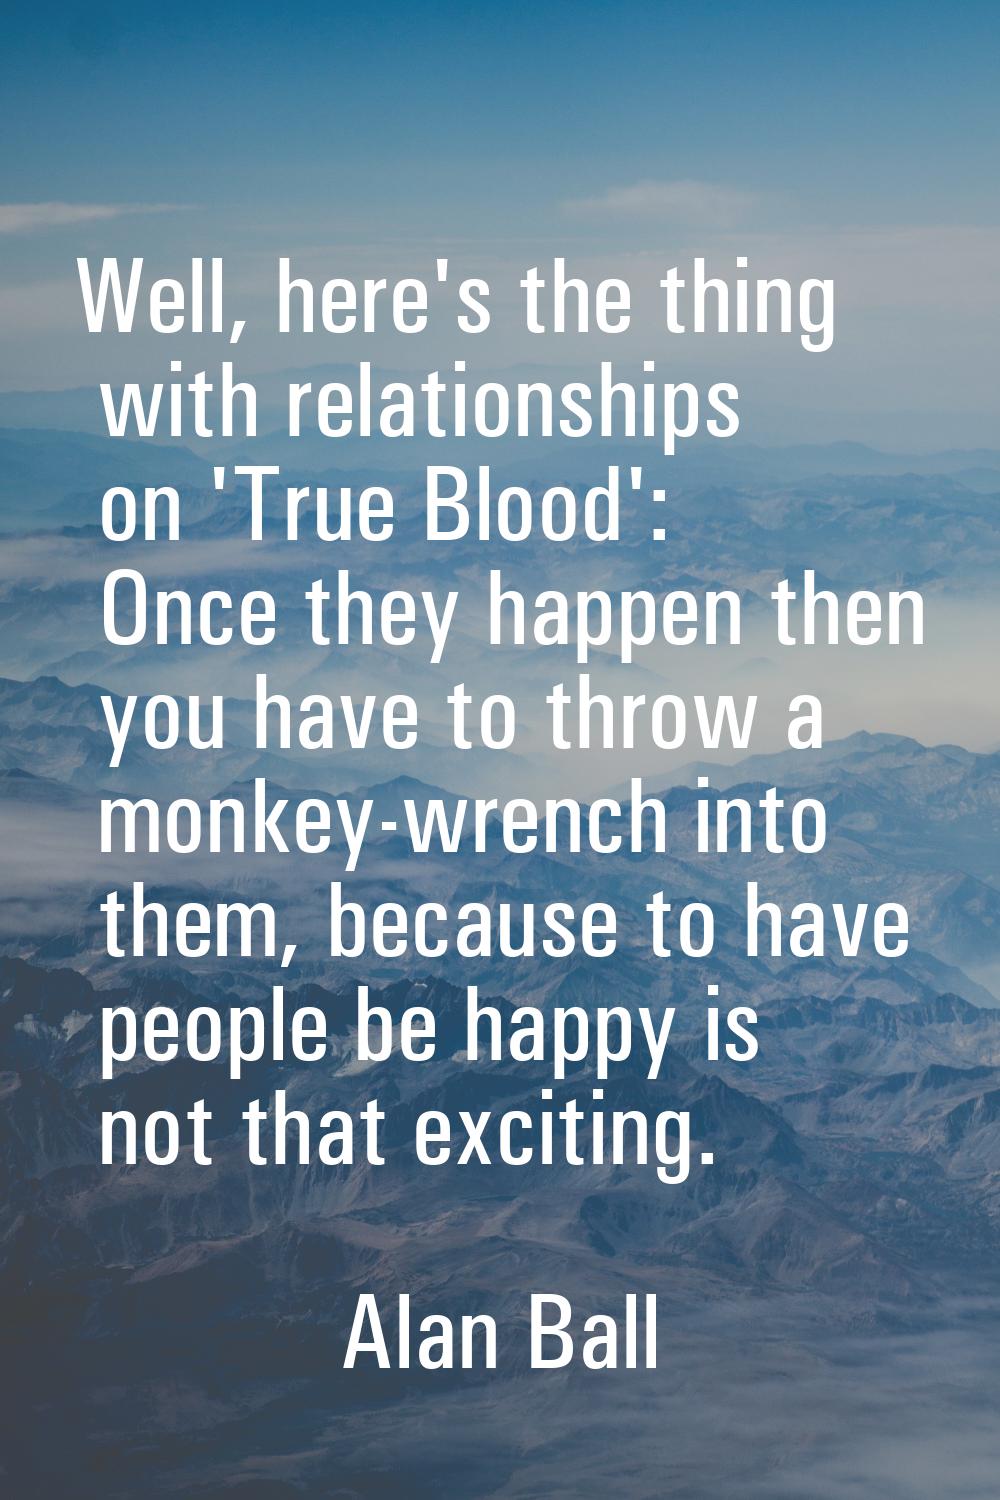 Well, here's the thing with relationships on 'True Blood': Once they happen then you have to throw 